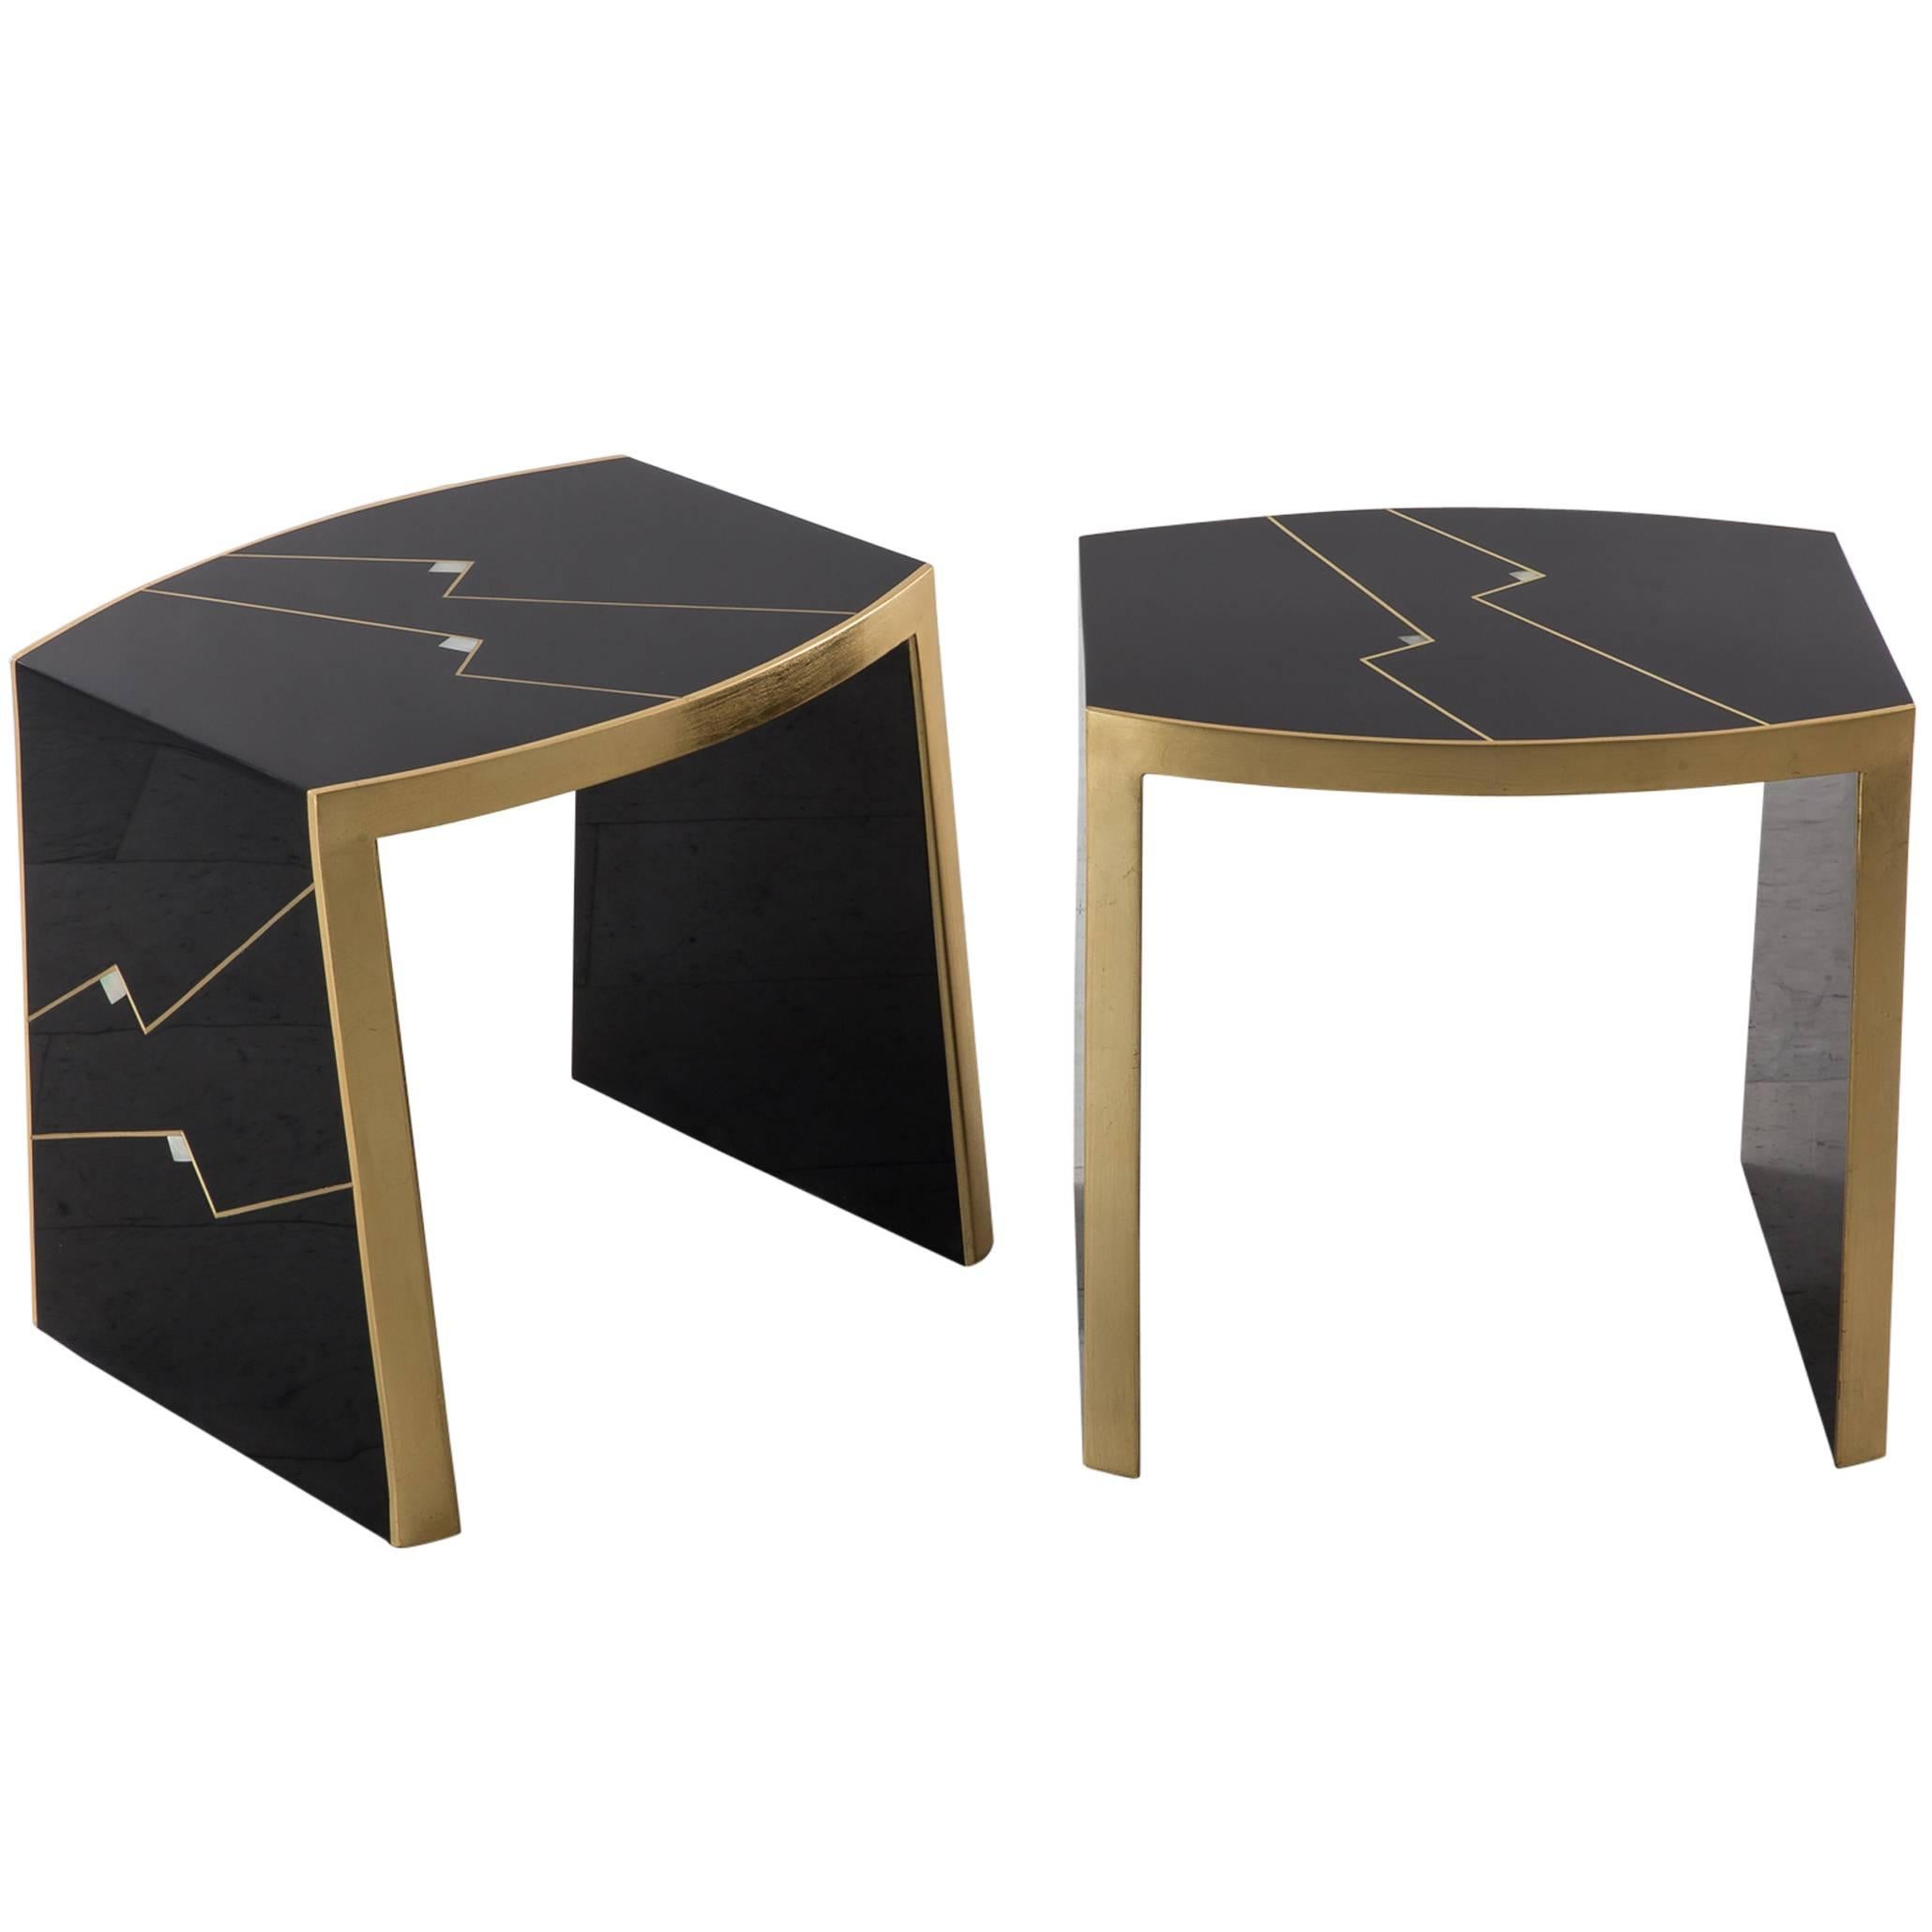 Ron Seff, Pair of “Ritz” Gilt and Lacquer Side Tables, USA, circa 1980